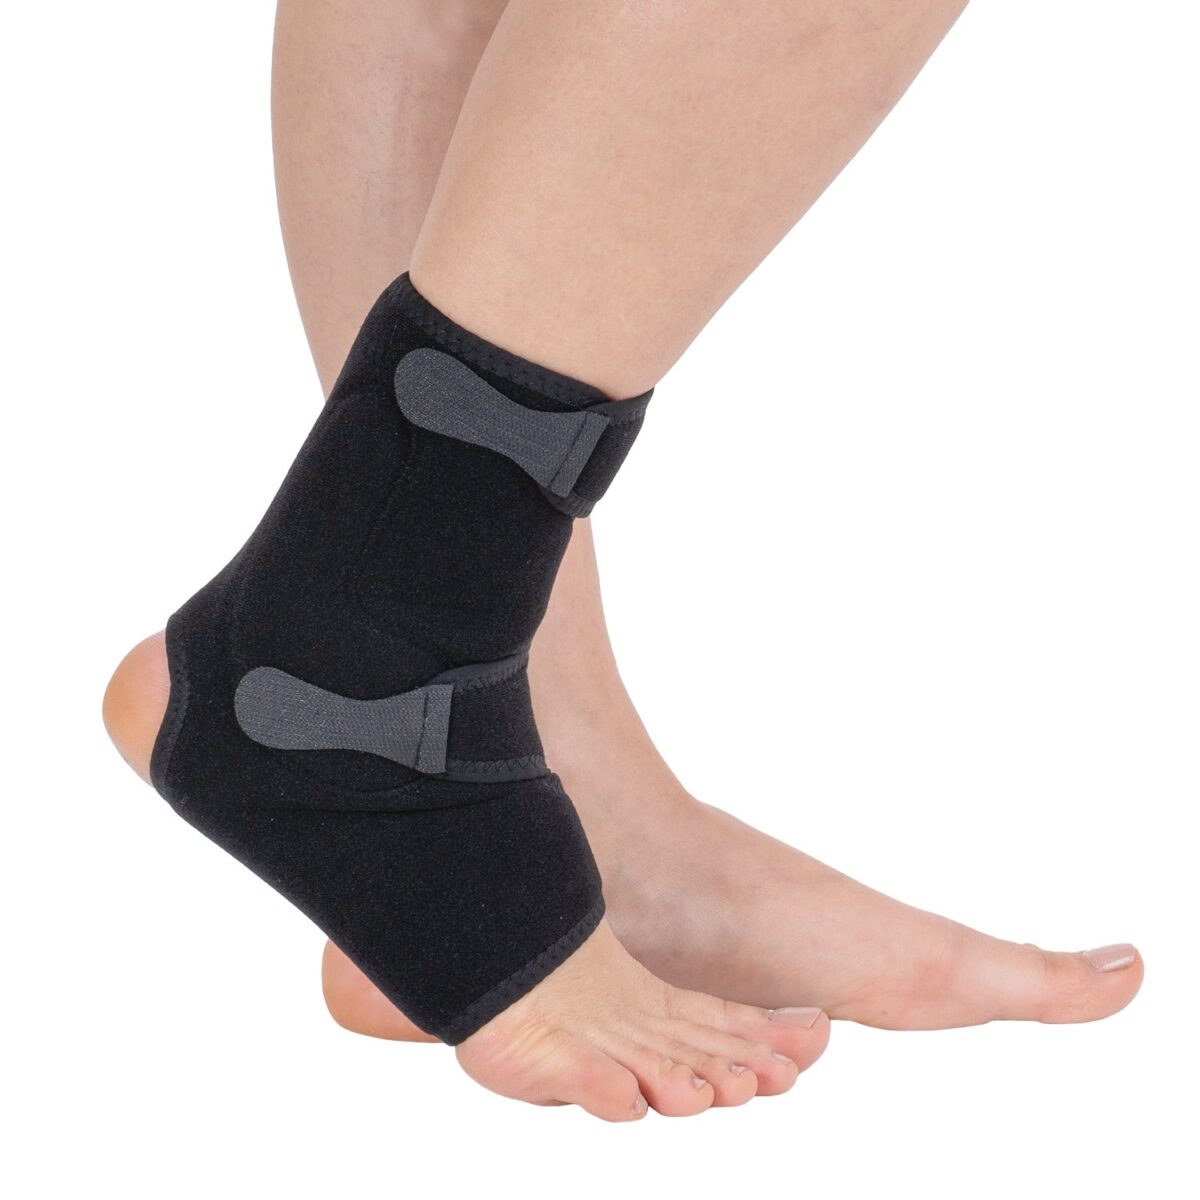 wingmed orthopedic equipments W605 malleol ankle support with 8 strap 71 1